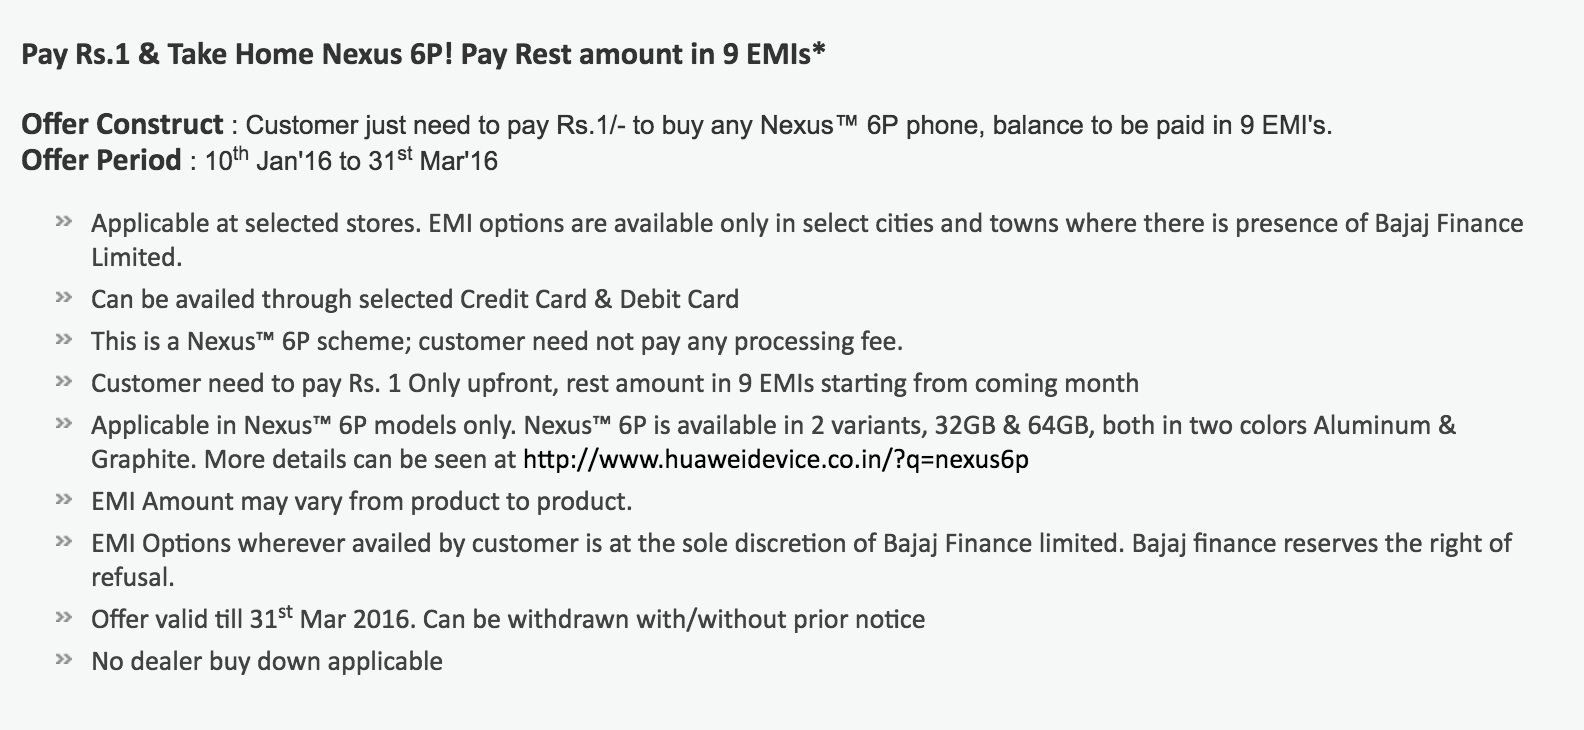 Nexus 6P Offer Terms and Conditions